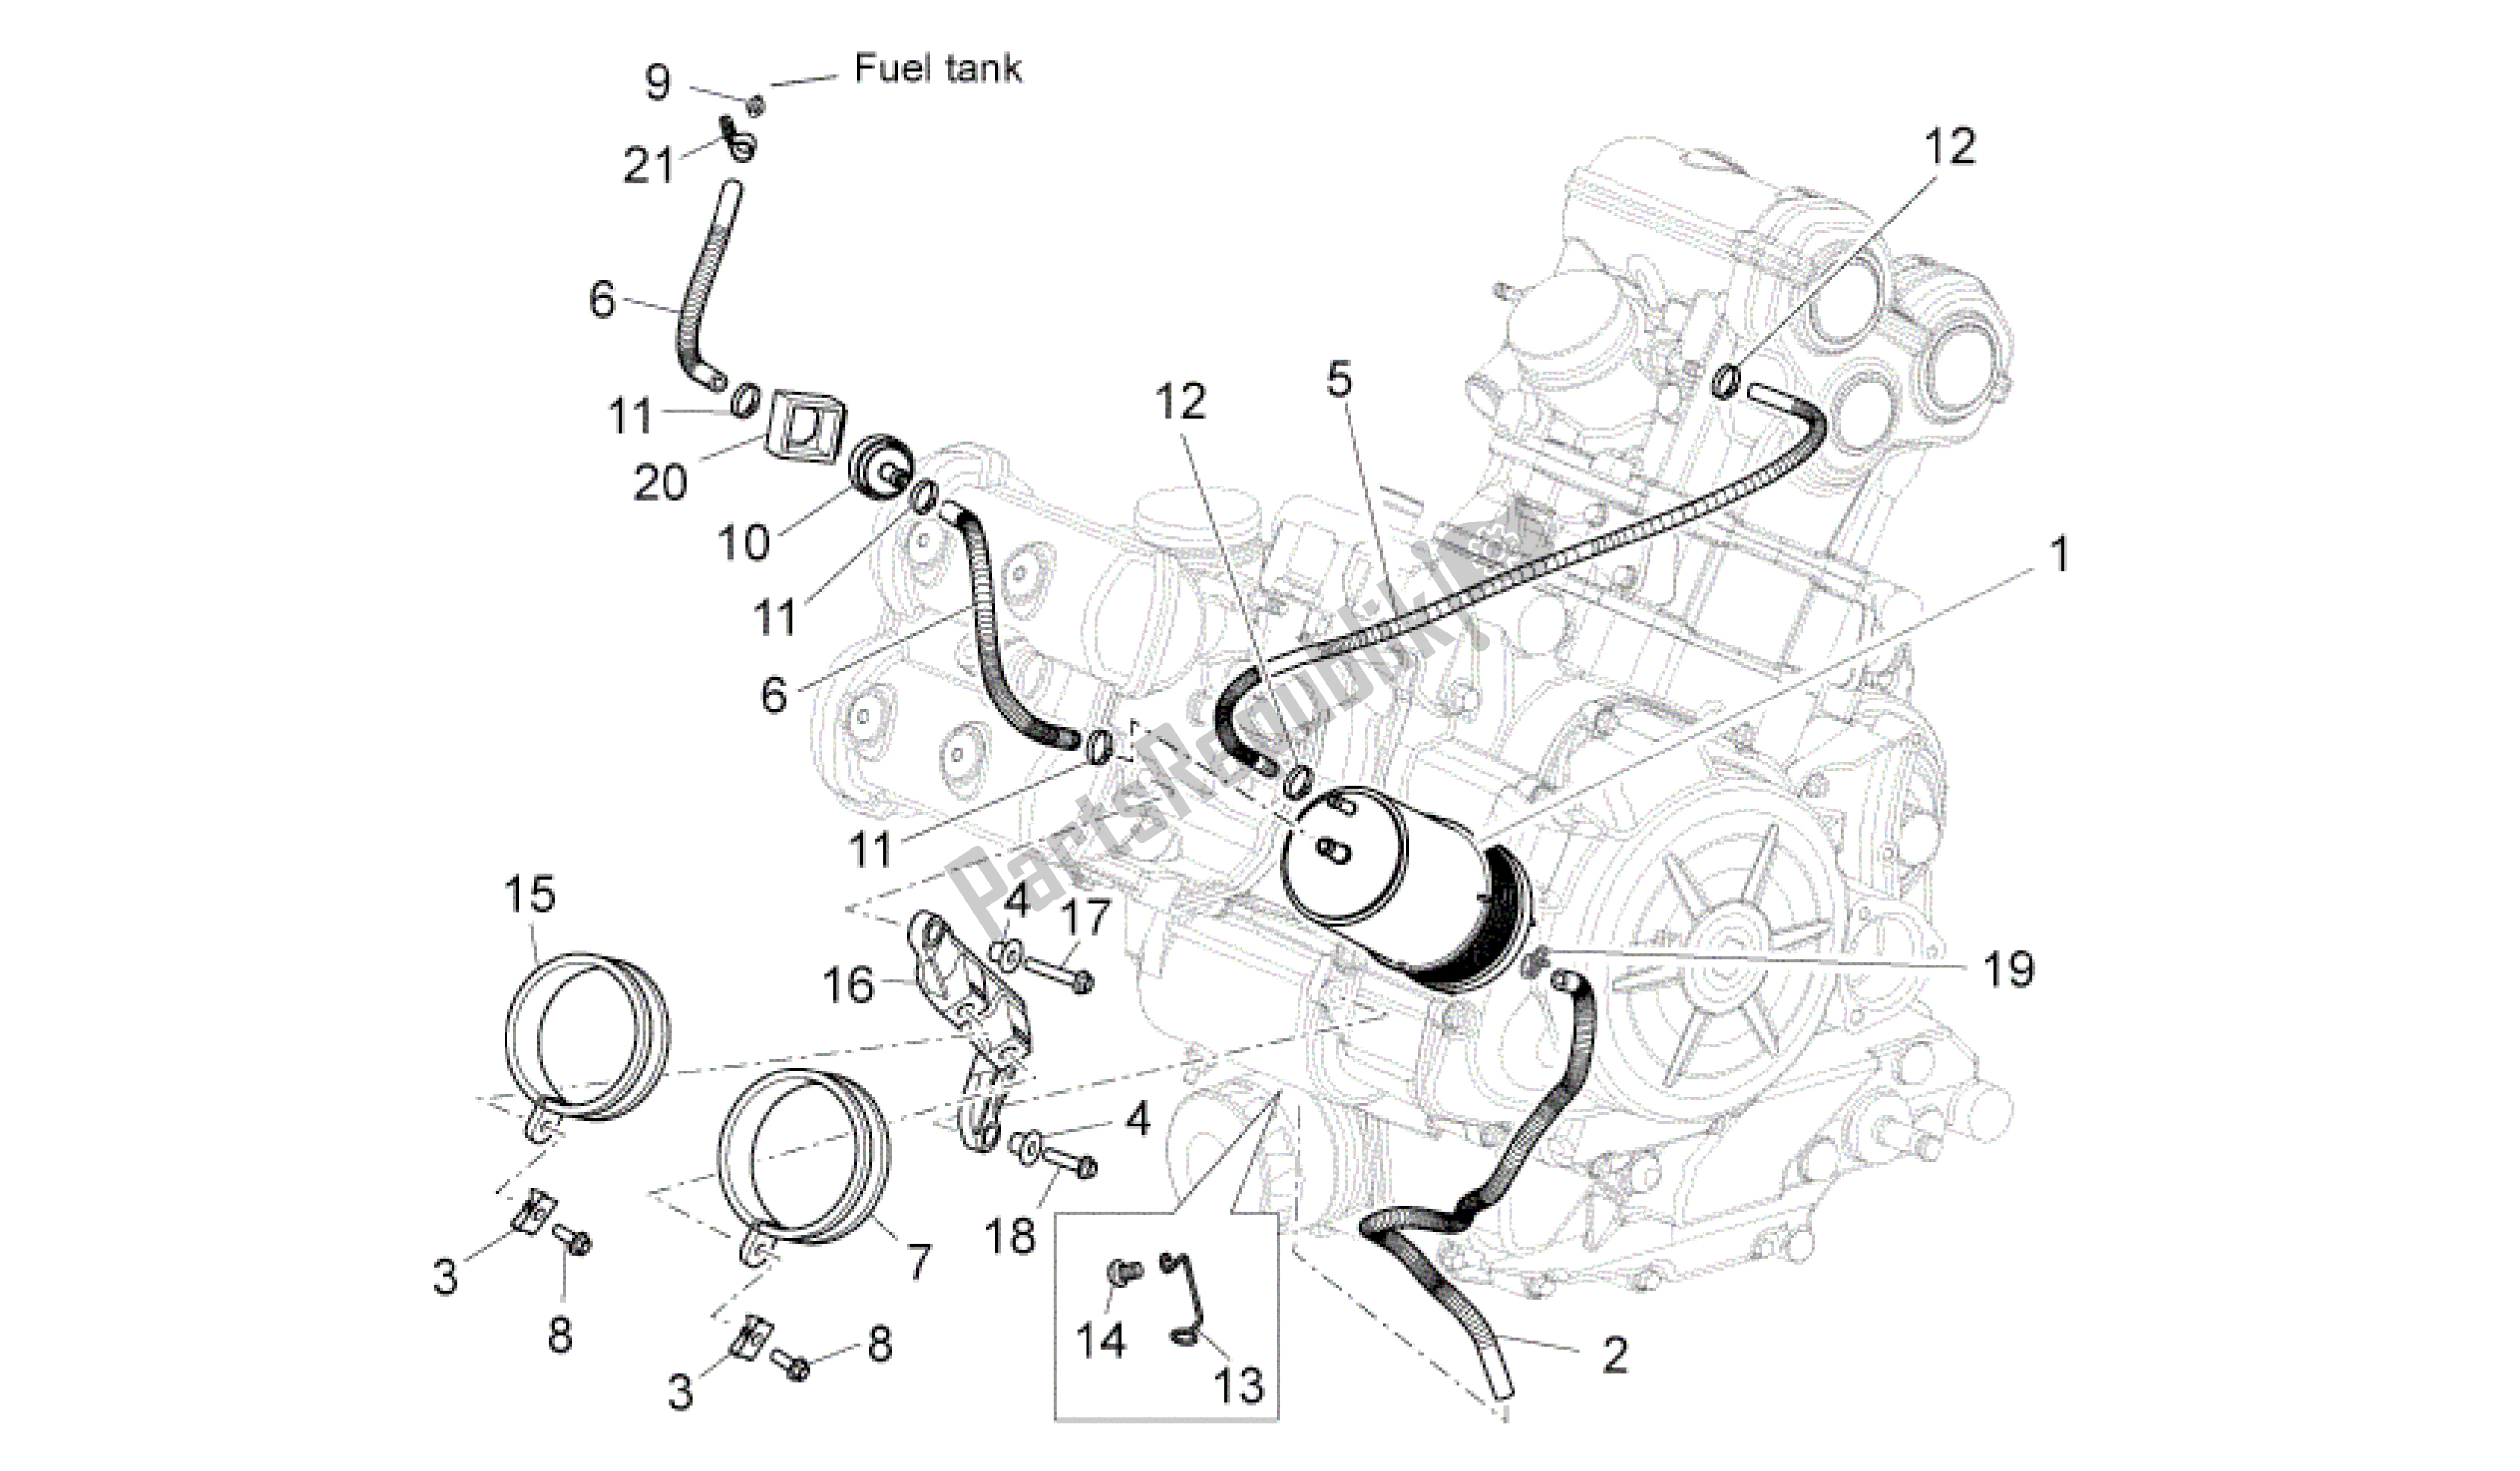 All parts for the Fuel Vapour Recover System of the Aprilia Shiver 750 2011 - 2013